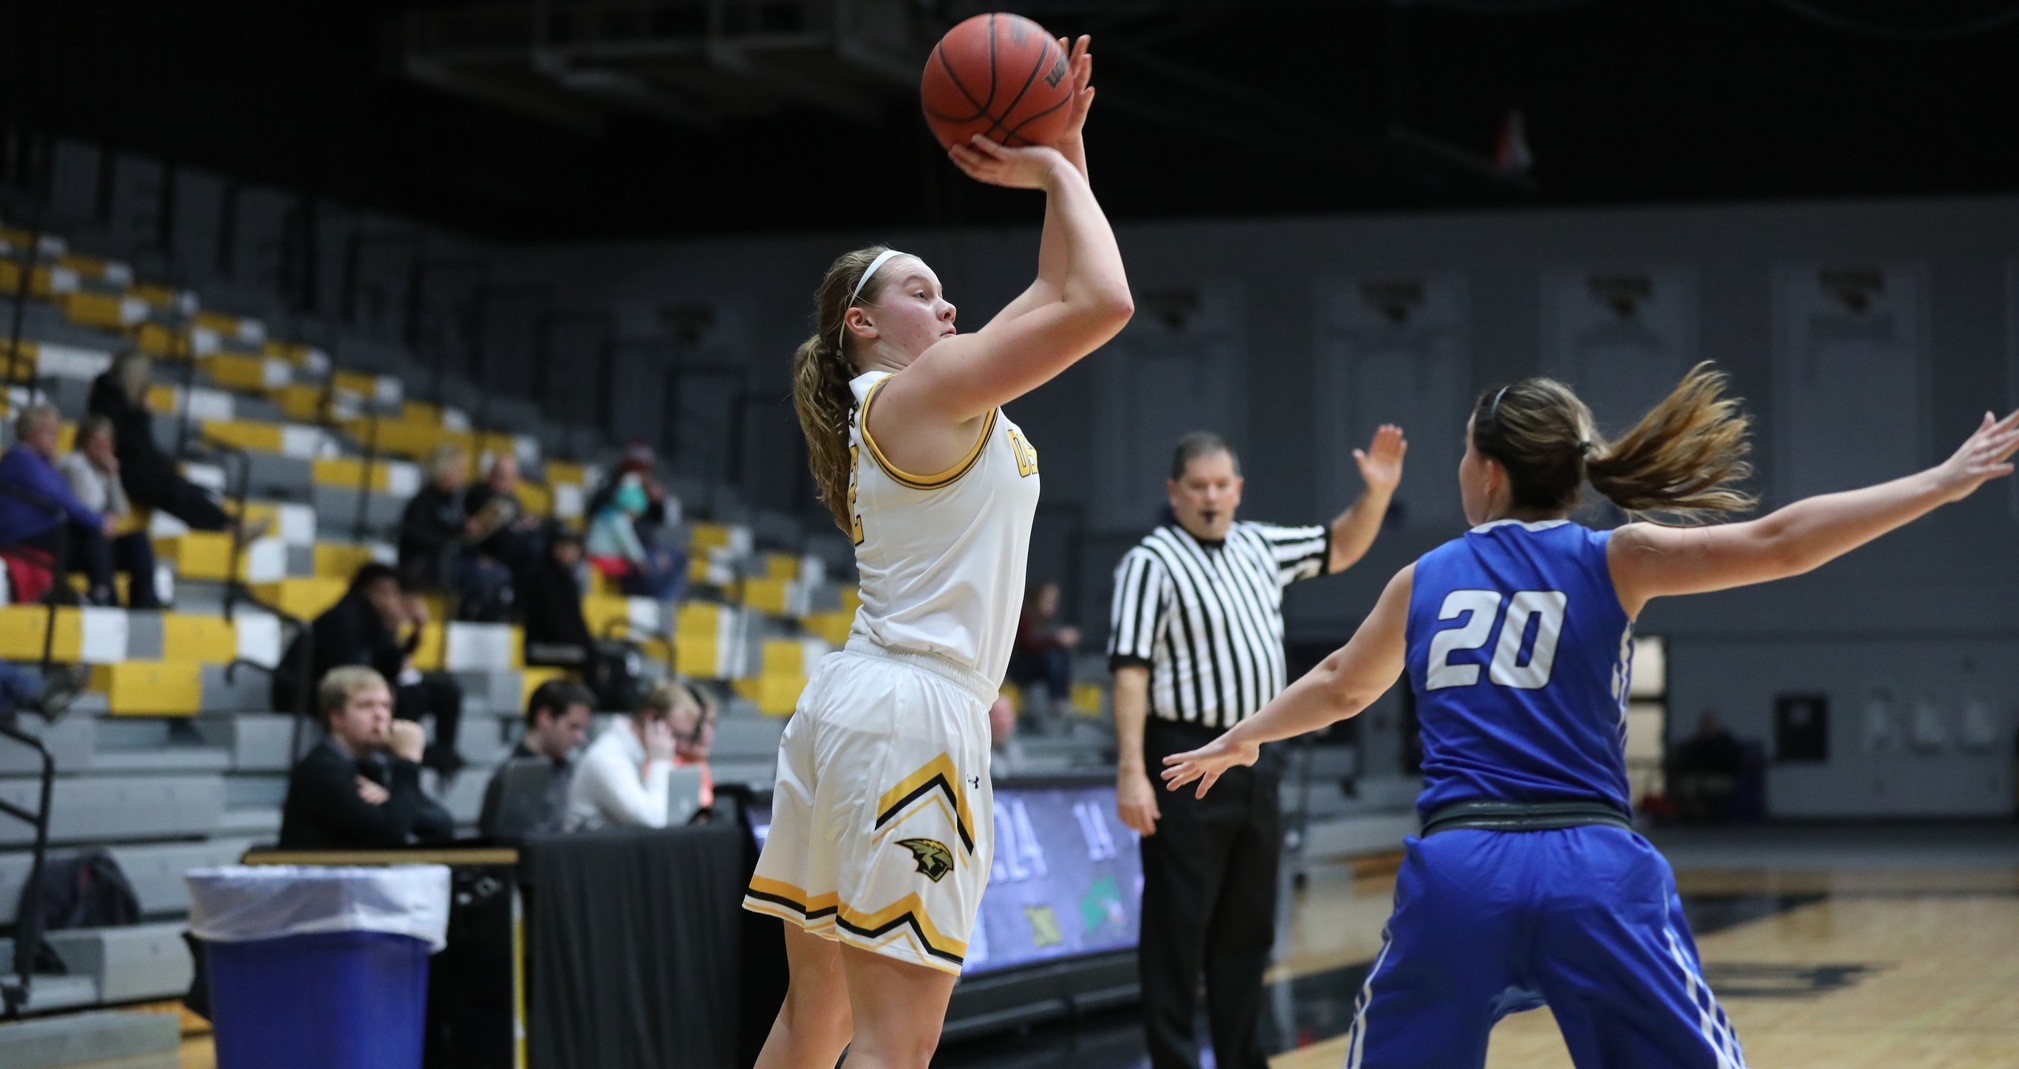 Leah Porath scored 10 points and grabbed two rebounds in 12 minutes of action against the Lions.